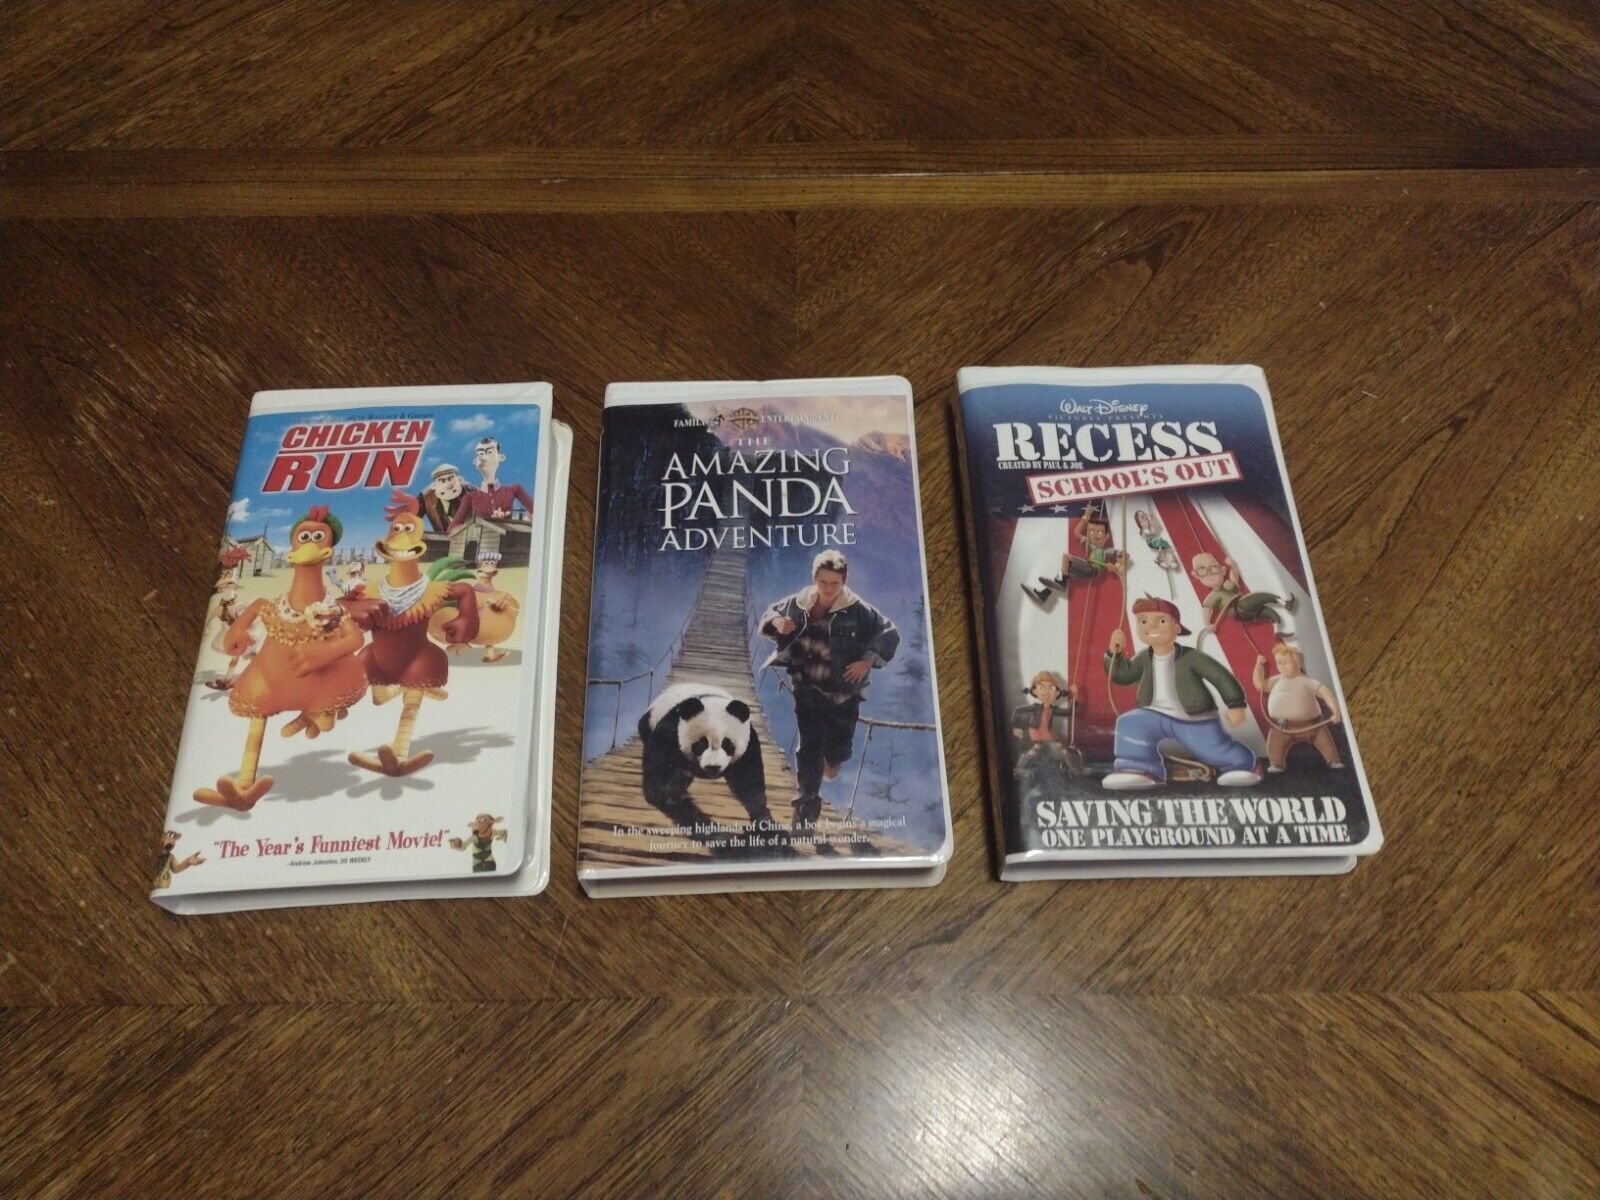 Primary image for VHS Video Movie Lot CHICKEN RUN, AMAZING PANDA, RECESS SCHOOLS OUT Walt Disney